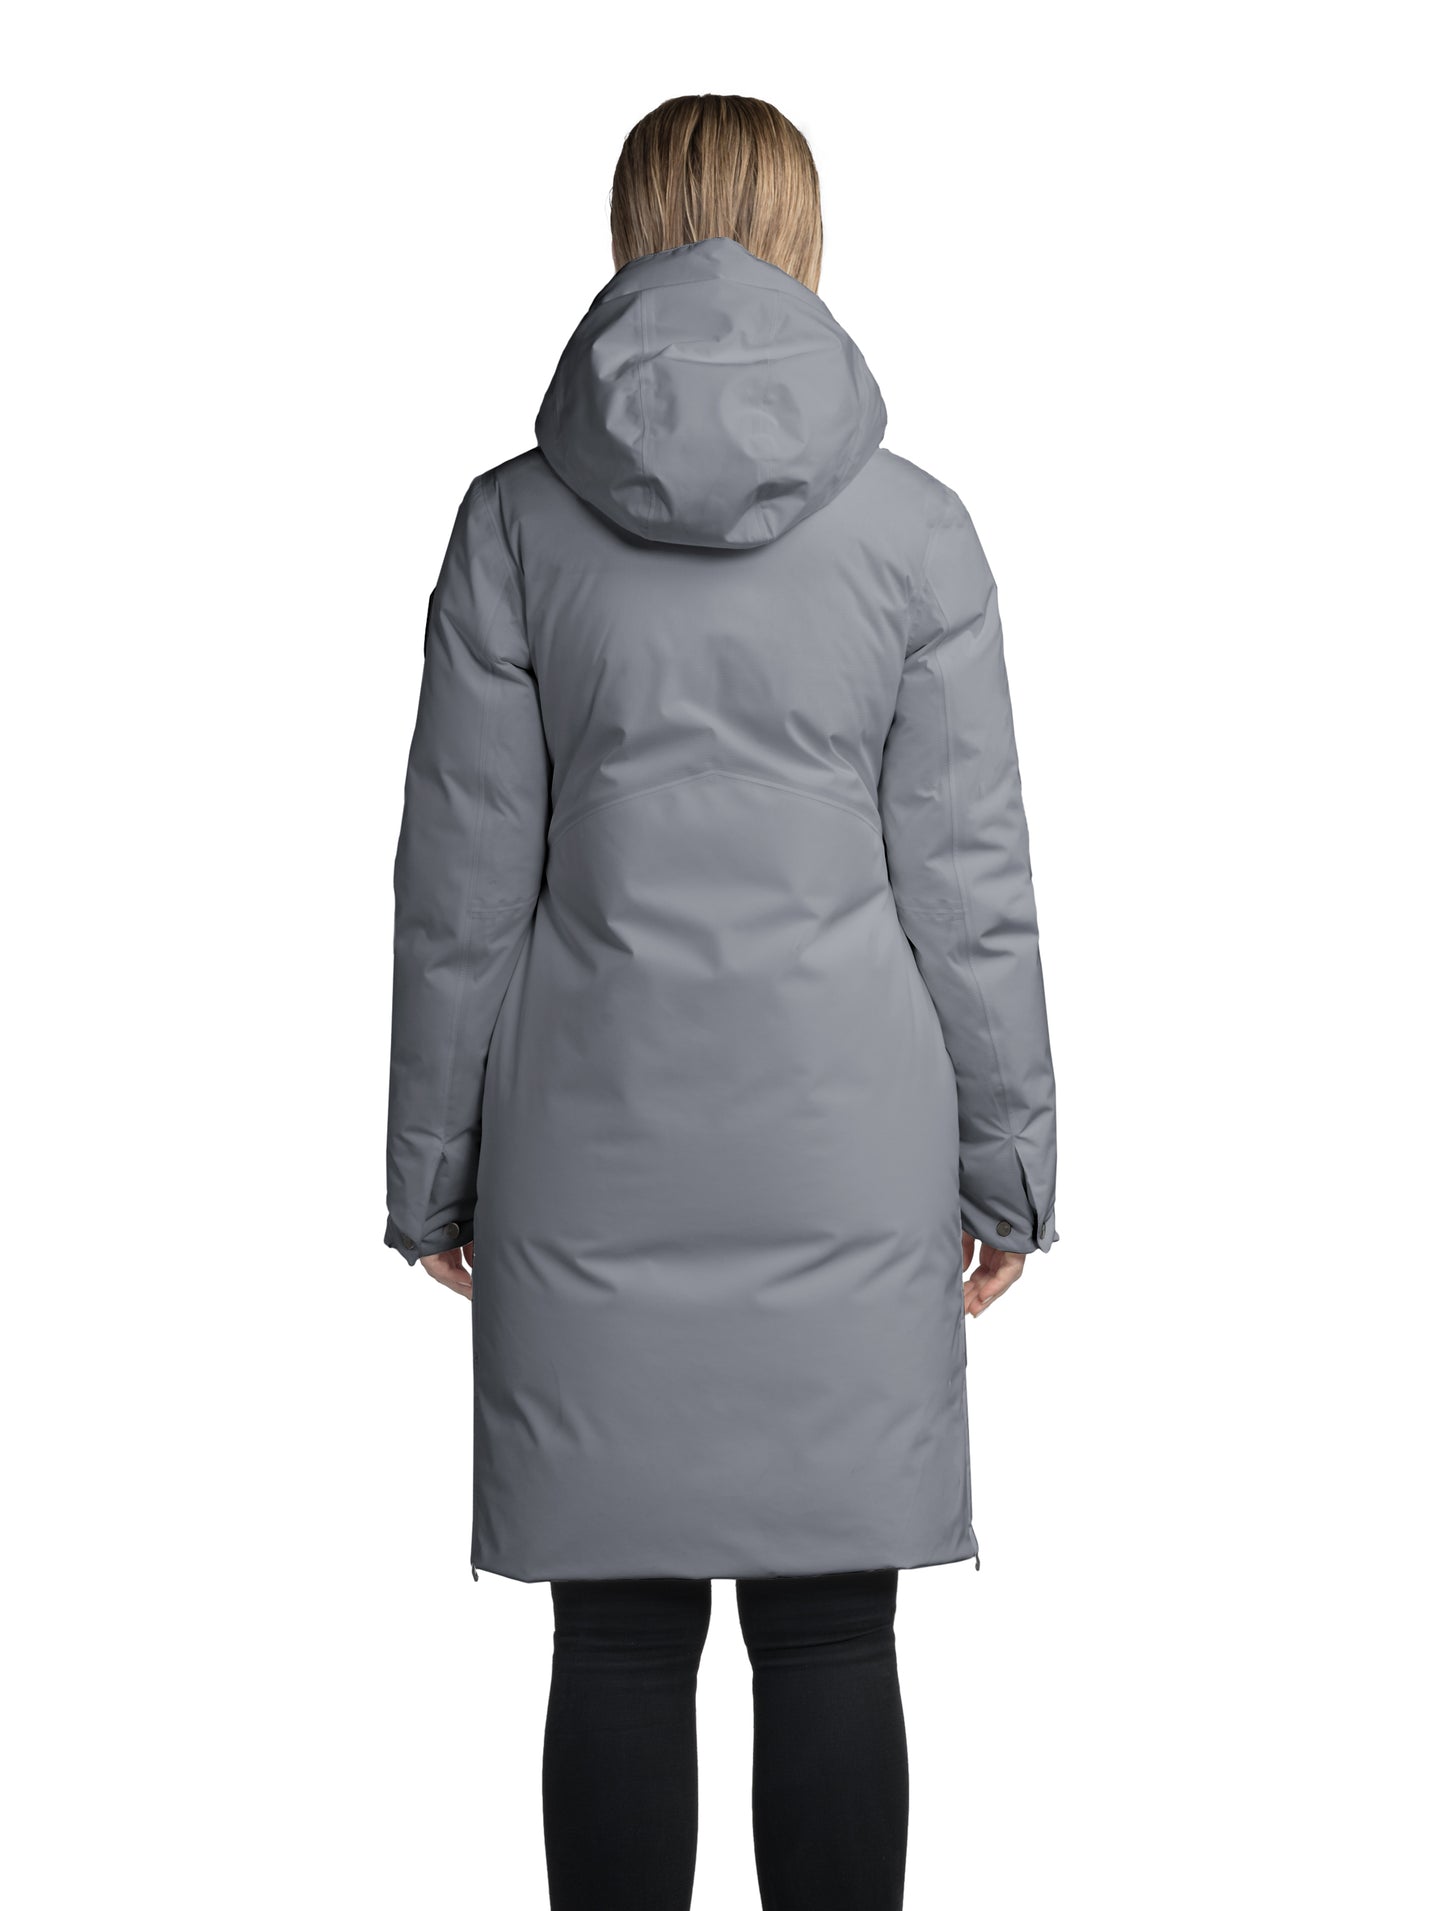 Inara Women's Performance Parka in knee length, premium 3-ply micro denier and stretch ripstop fabrication with DWR coating, Premium Canadian White Duck Down insulation, non-removable down-filled hood, centre front two-way zipper, large vertical zipper pockets along waist, zipper vents along bottom side hem, in Concrete